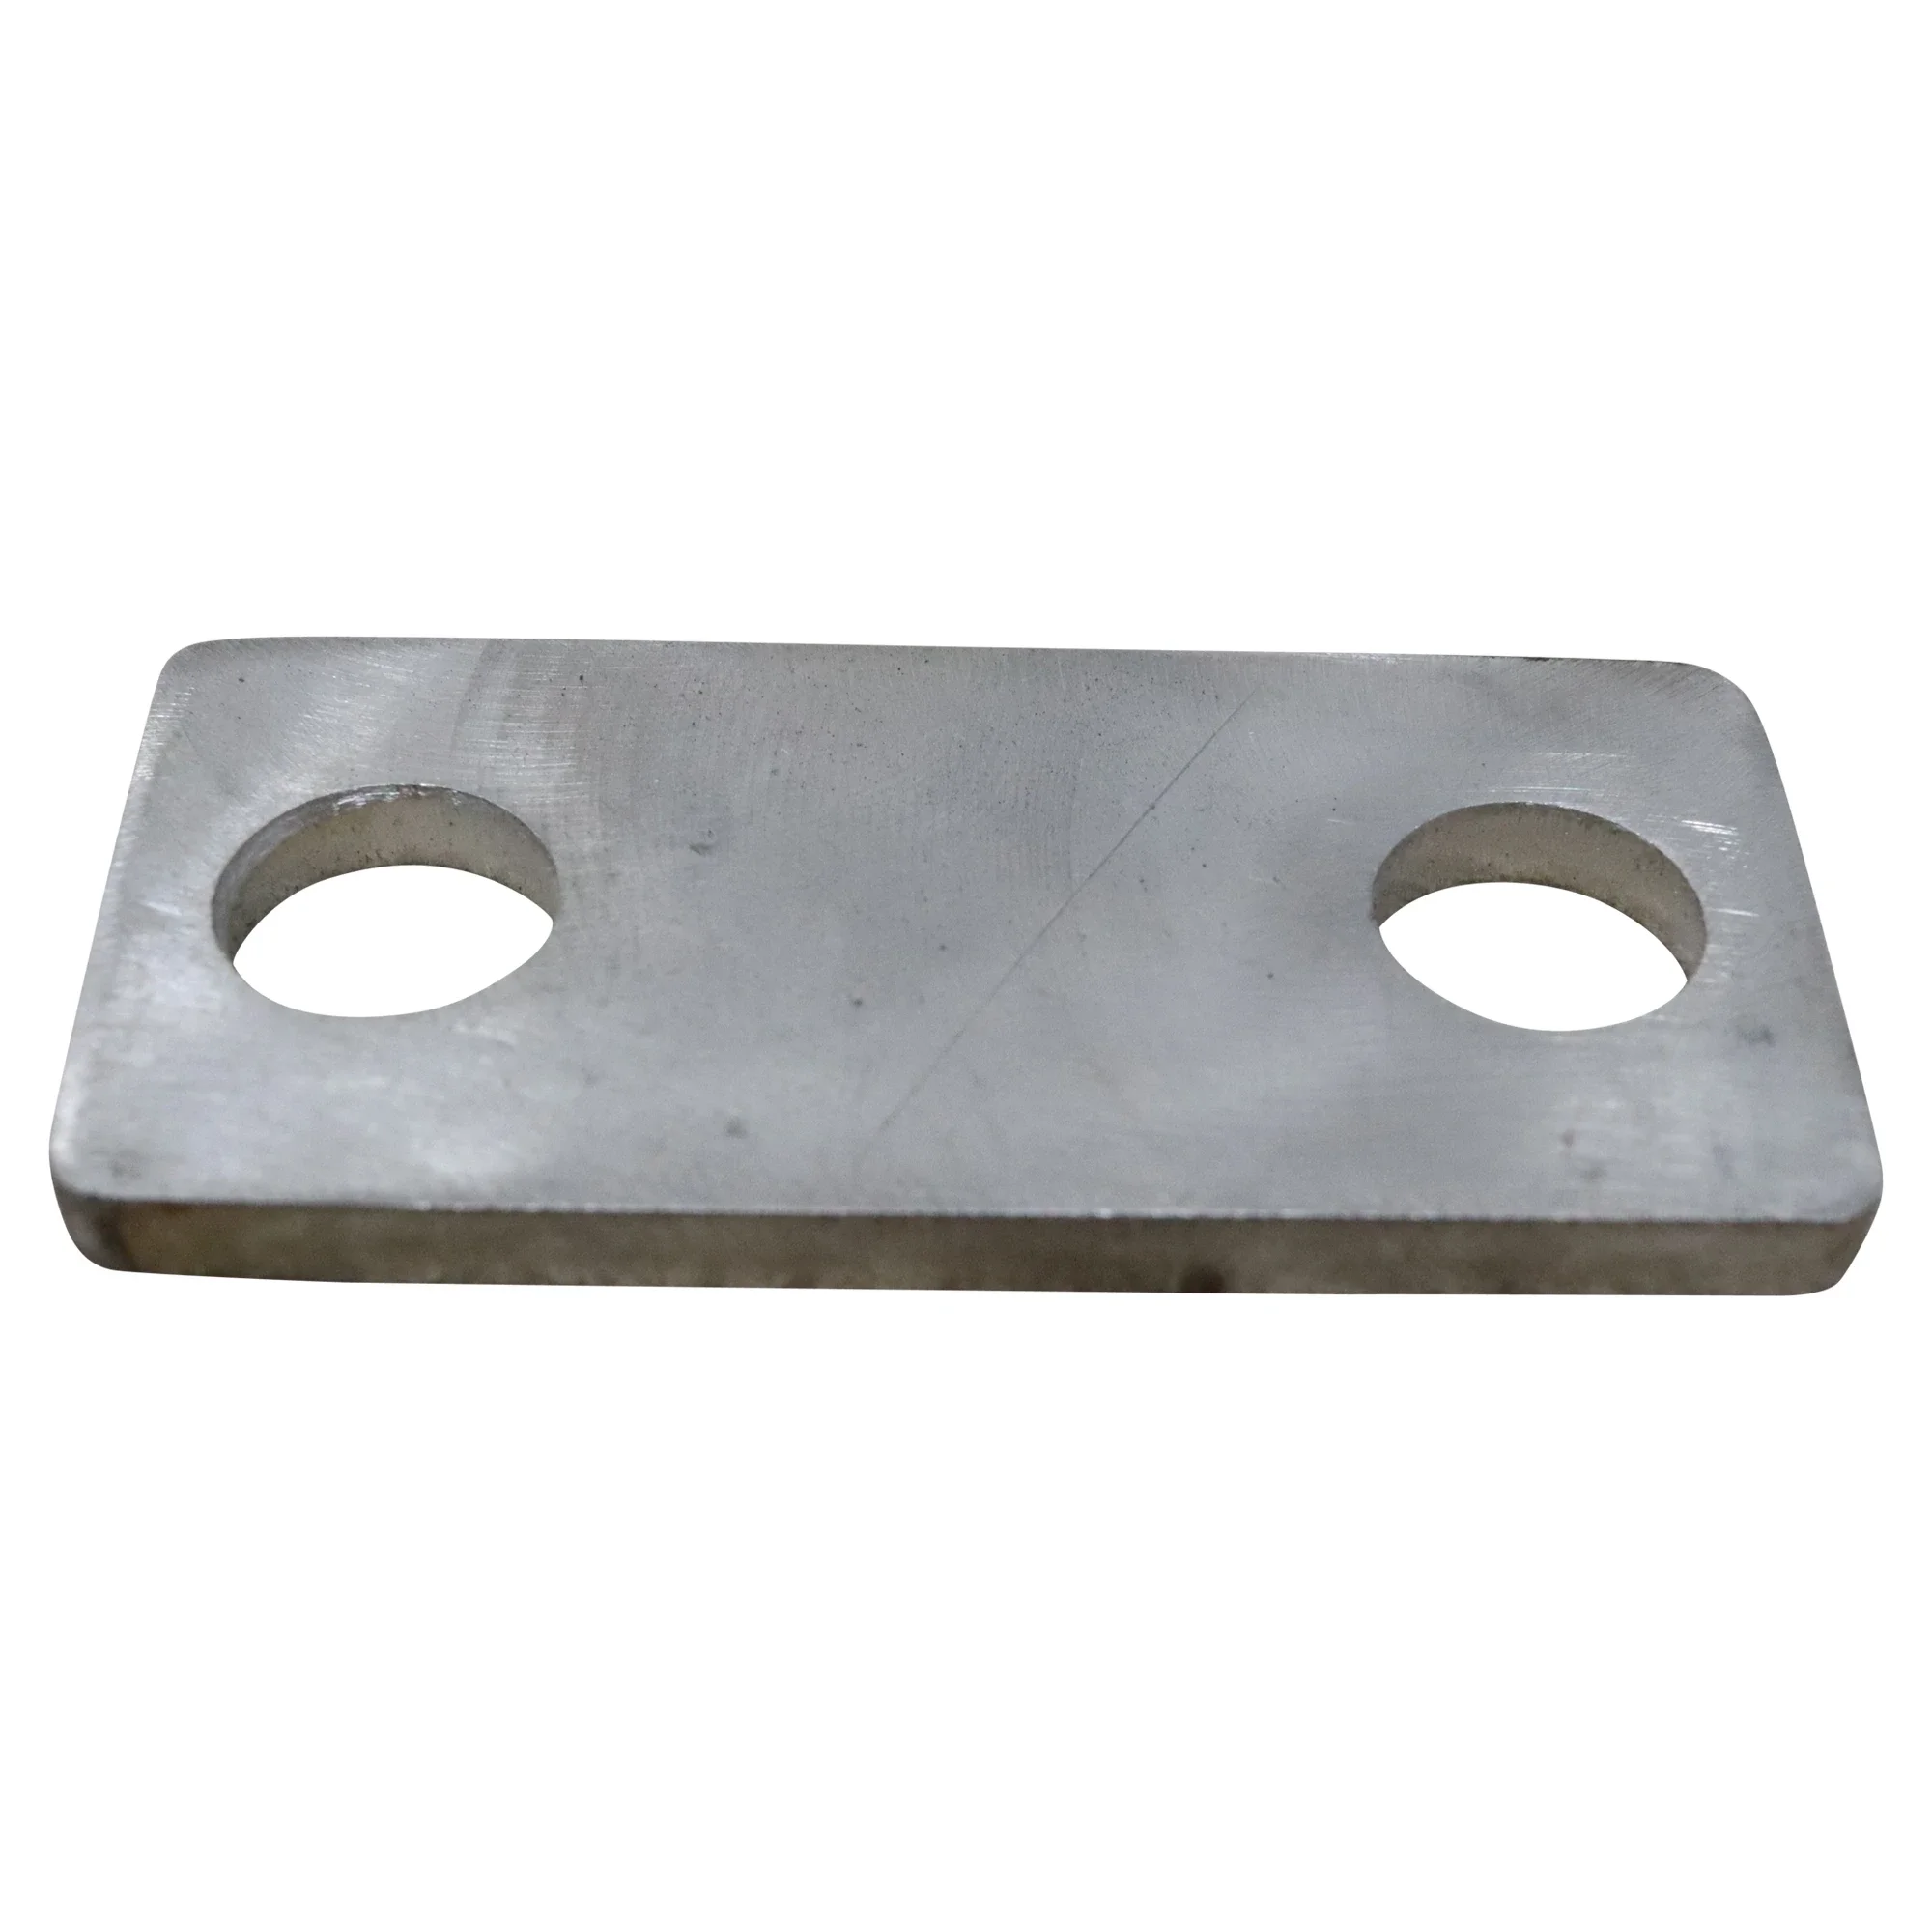 Wastebuilt® Replacement for Labrie Retainer Gripper Plate